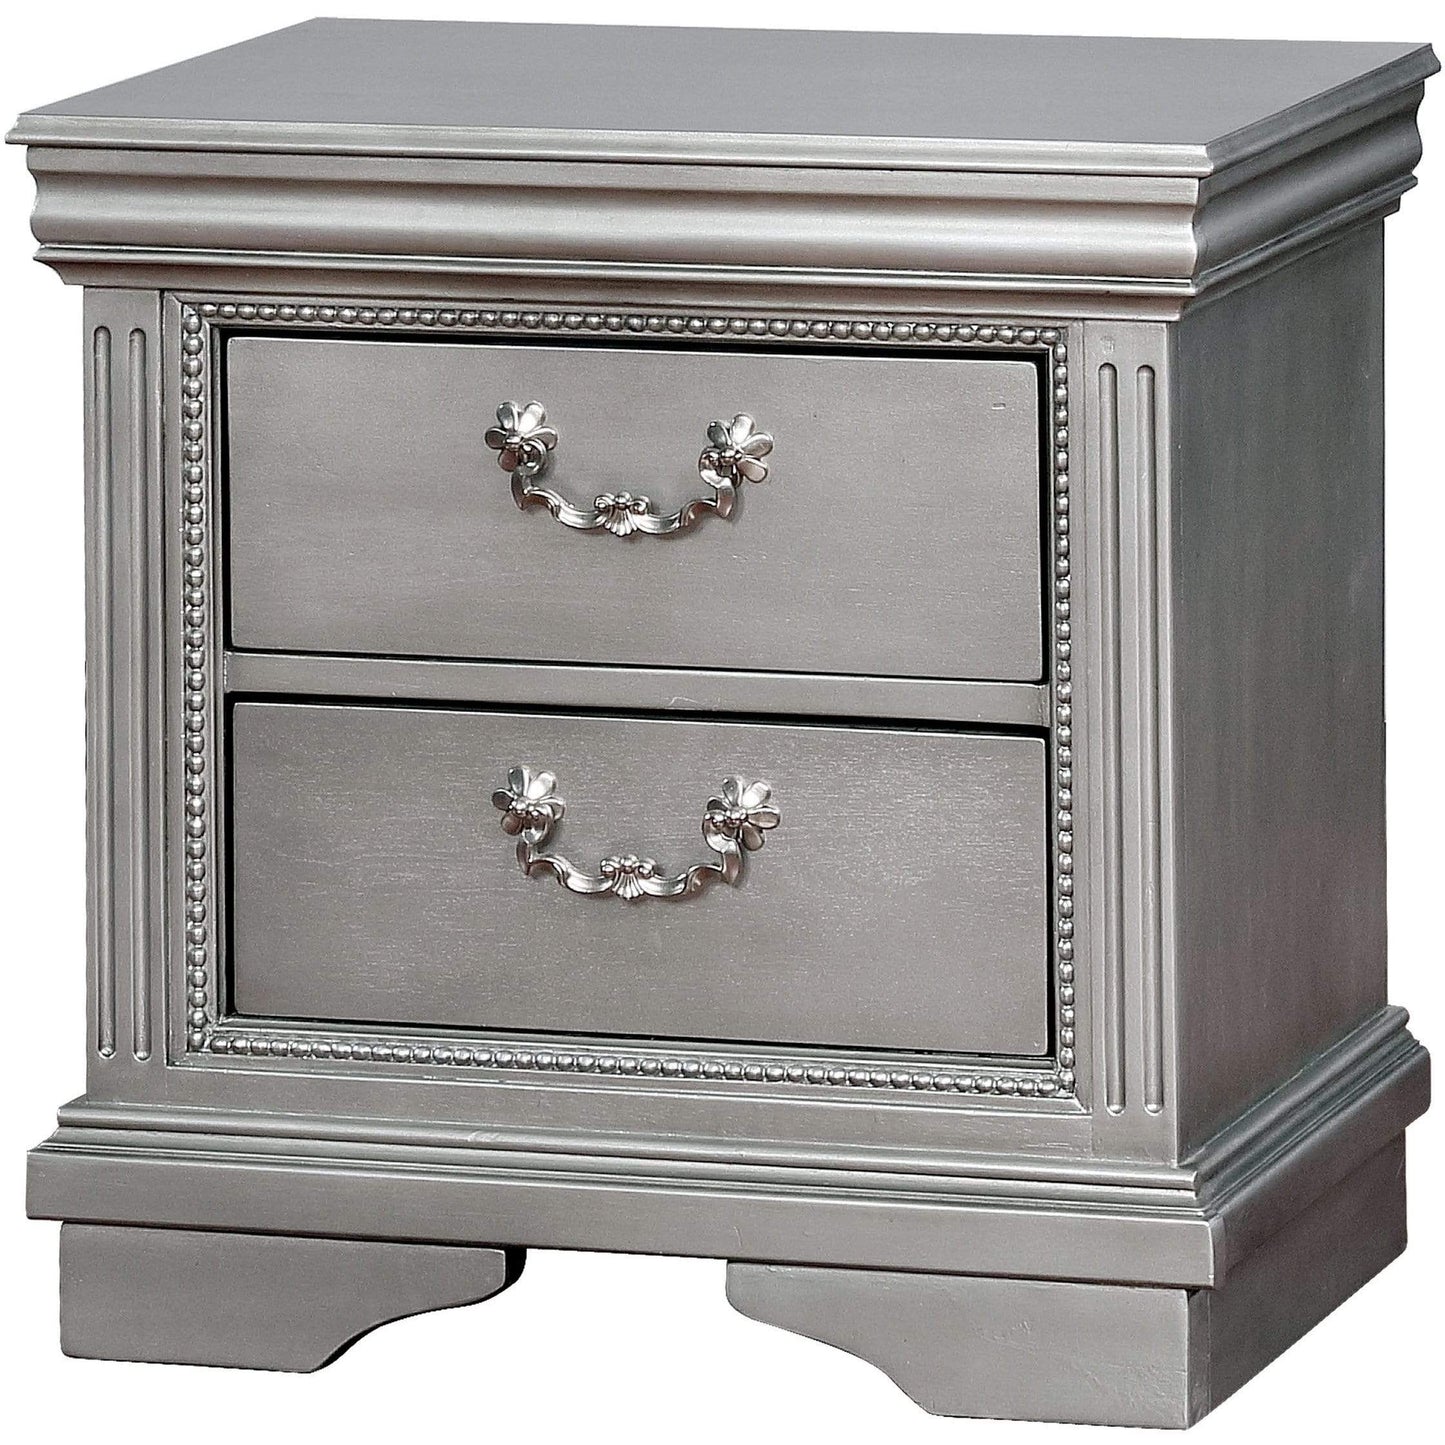 Furniture of America Nightstand Lester Traditional Nightstand